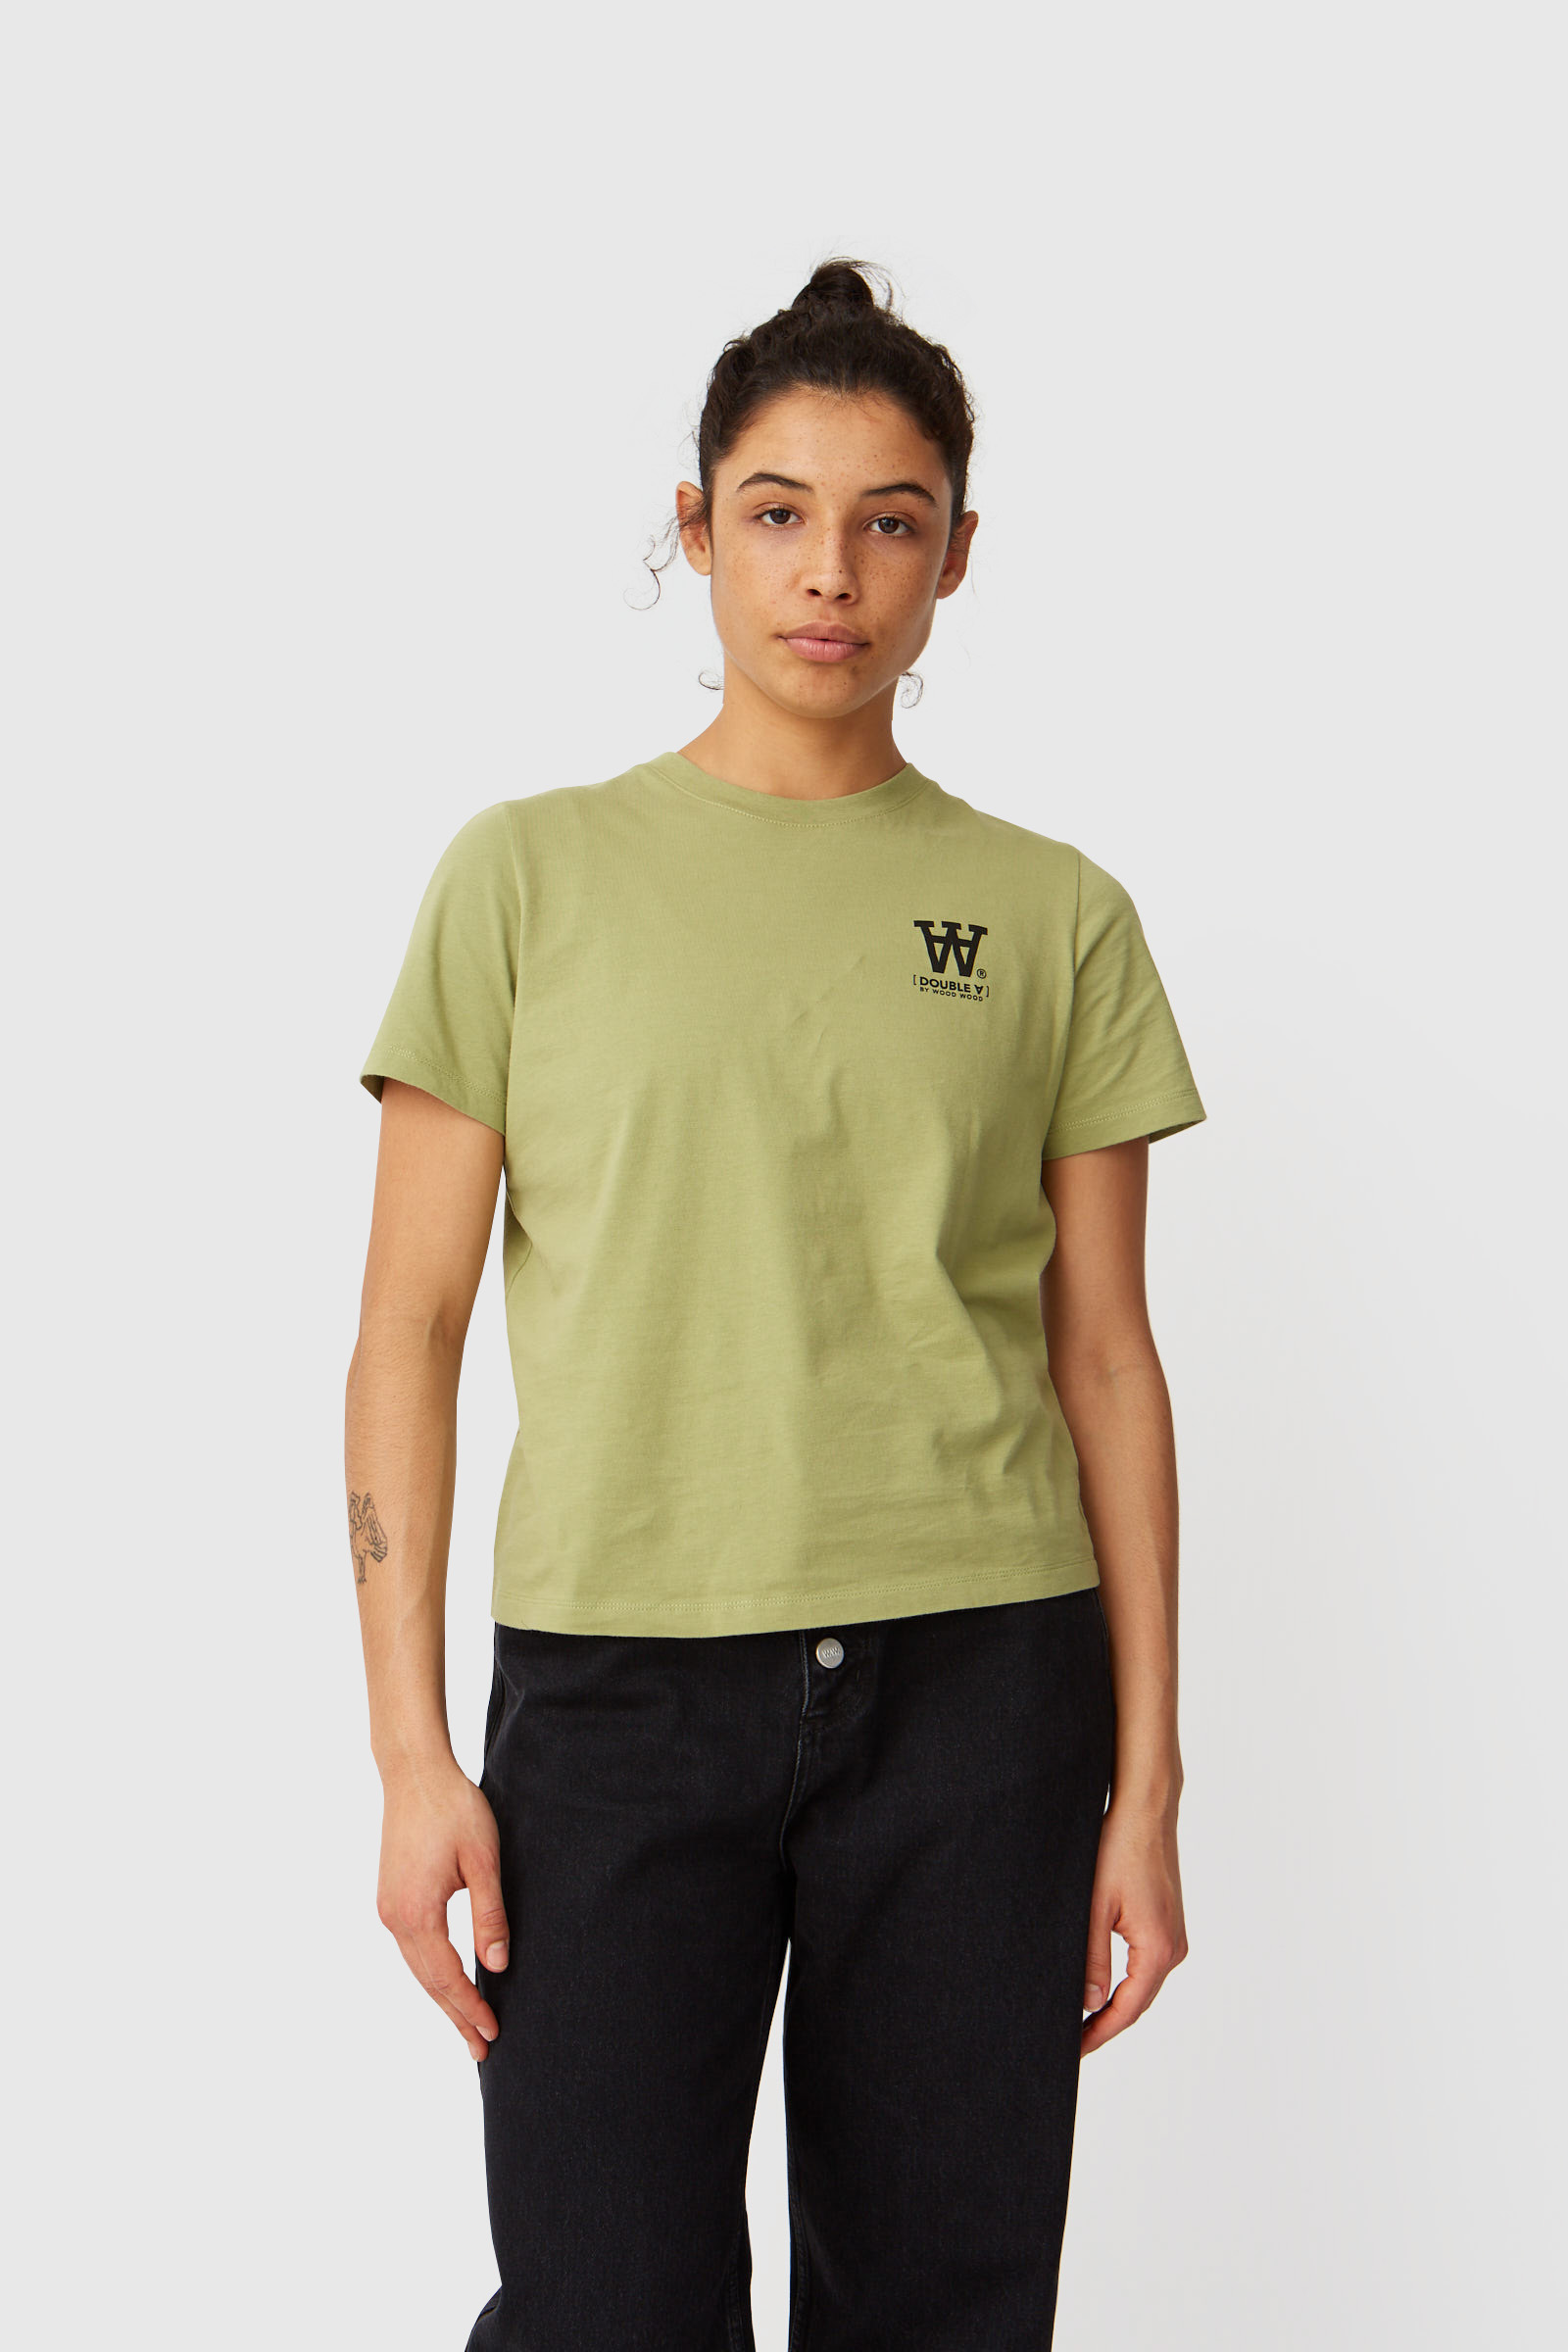 Double A by Wood Wood Mia T-shirt Olive green | WoodWood.com